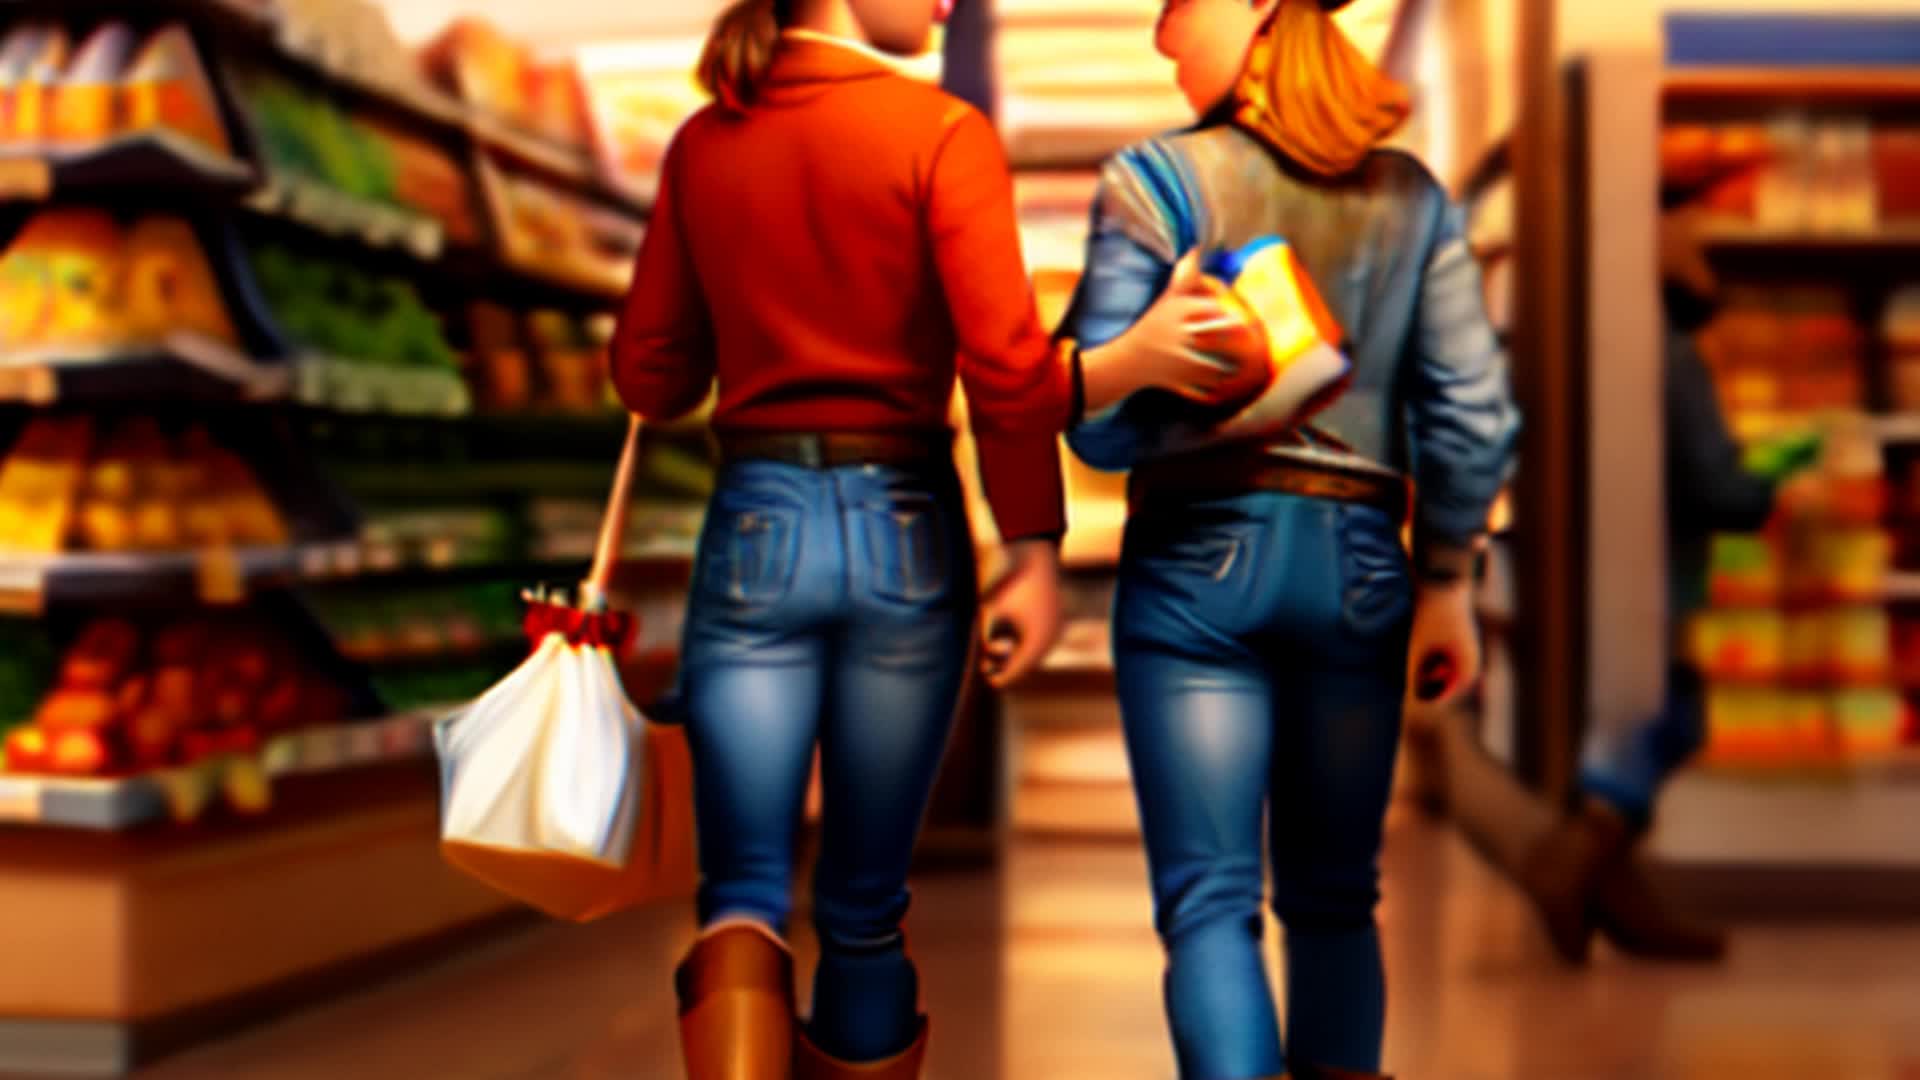 Woman in thigh-high boots and man in cowboy boots, exiting grocery store, groceries left behind, spontaneous, vibrant scene, dynamic angle